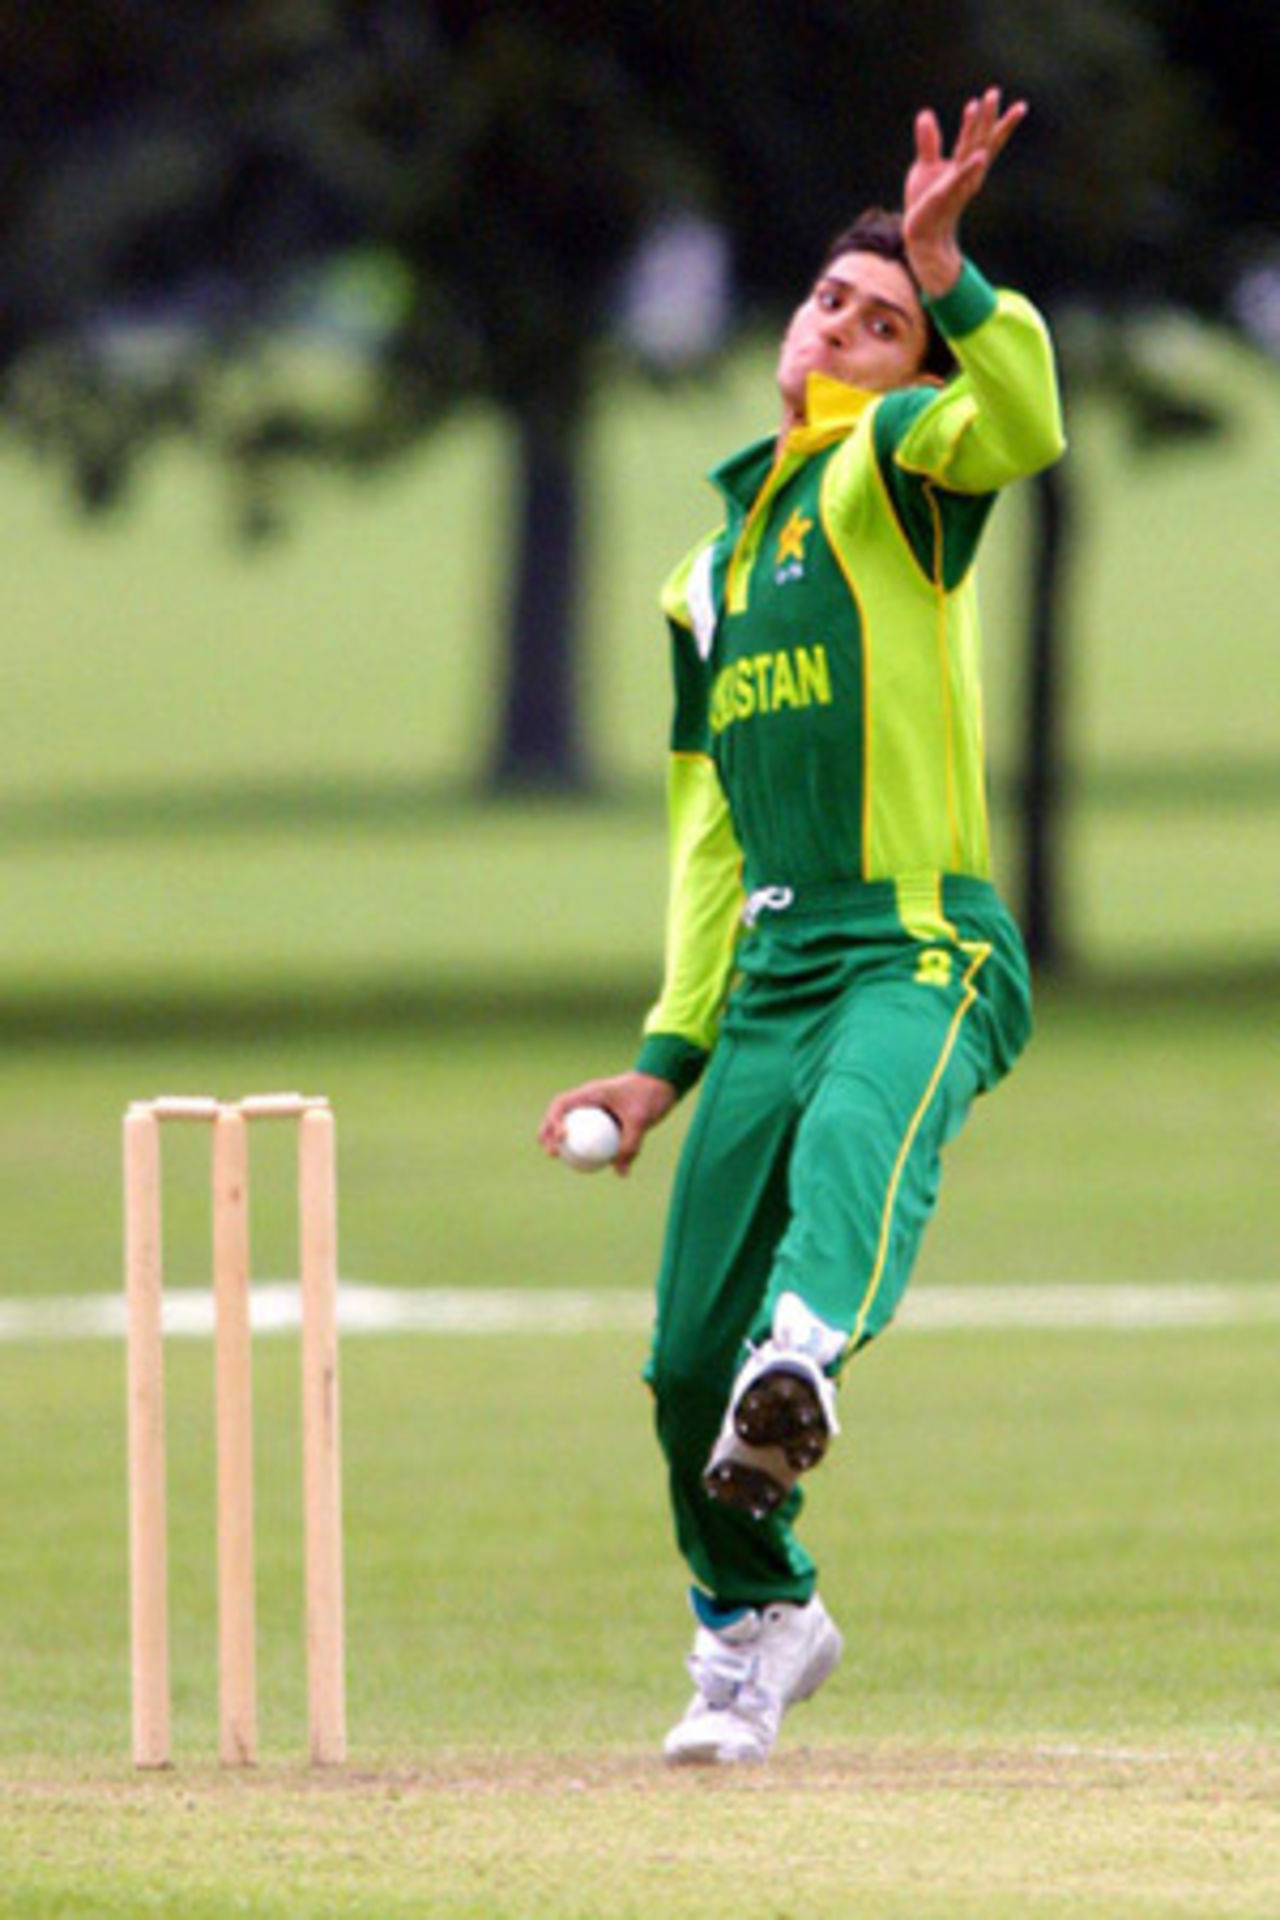 Pakistan Under-19 bowler Arsalan Mir delivers a ball. ICC Under-19 World Cup Warmup: Pakistan Under-19 v Zimbabwe Under-19 at Hagley Oval, Christchurch, 16 January 2002.